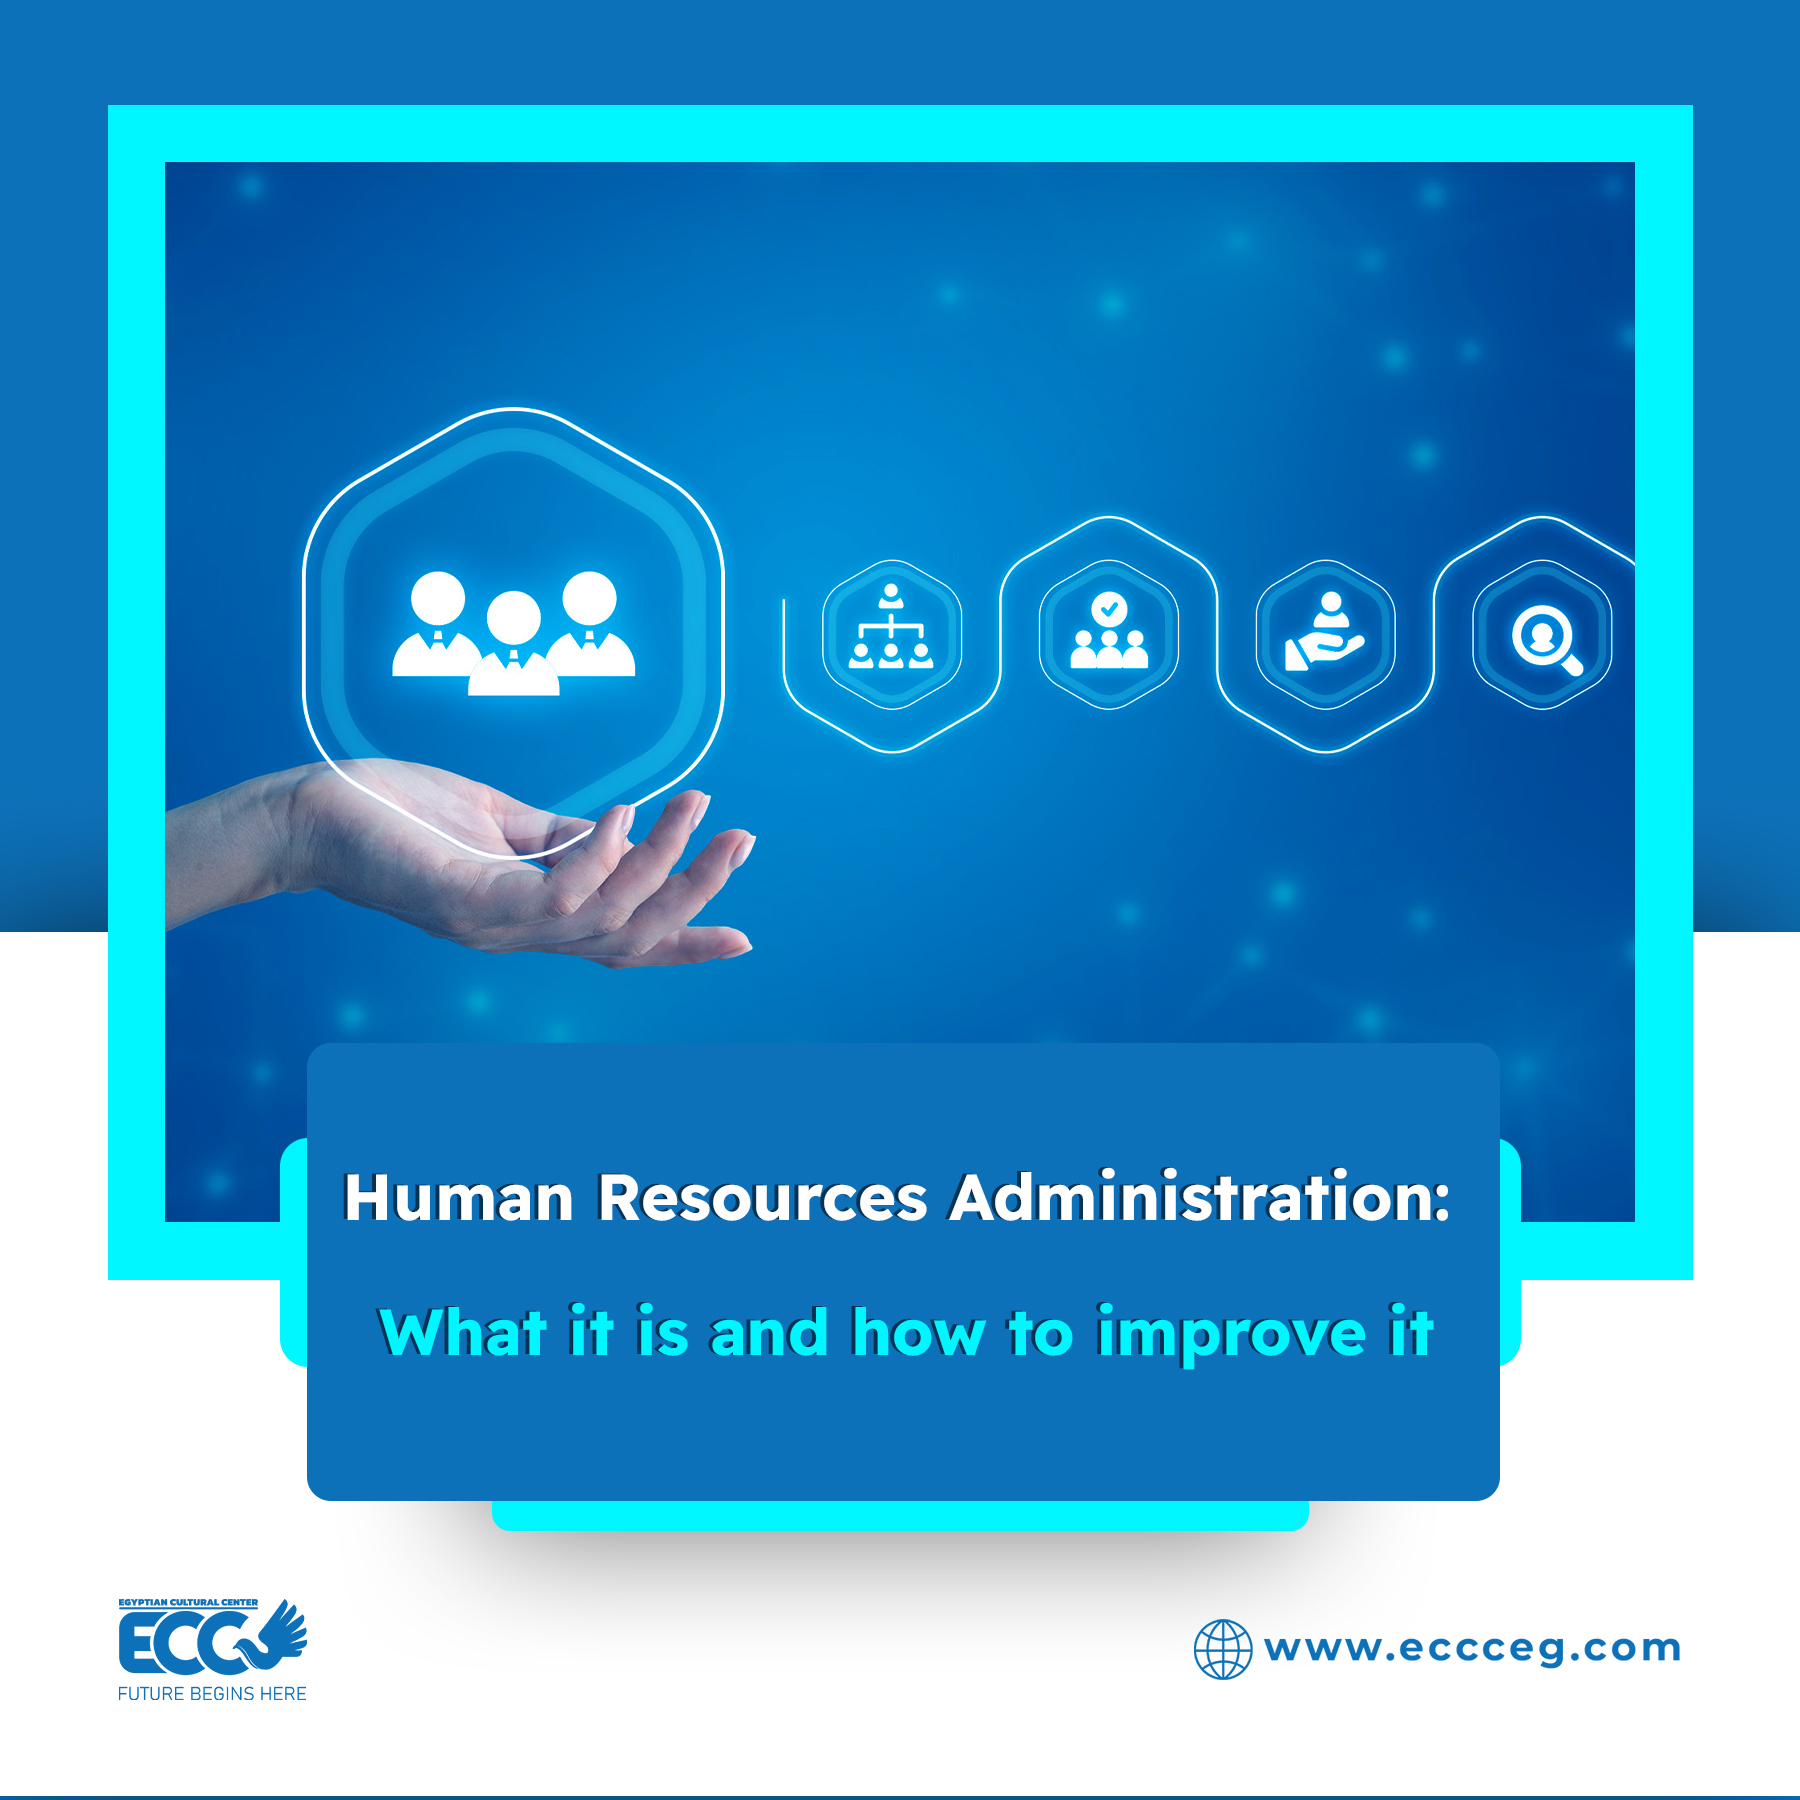 Human Resources Management: What it is and how to improve it